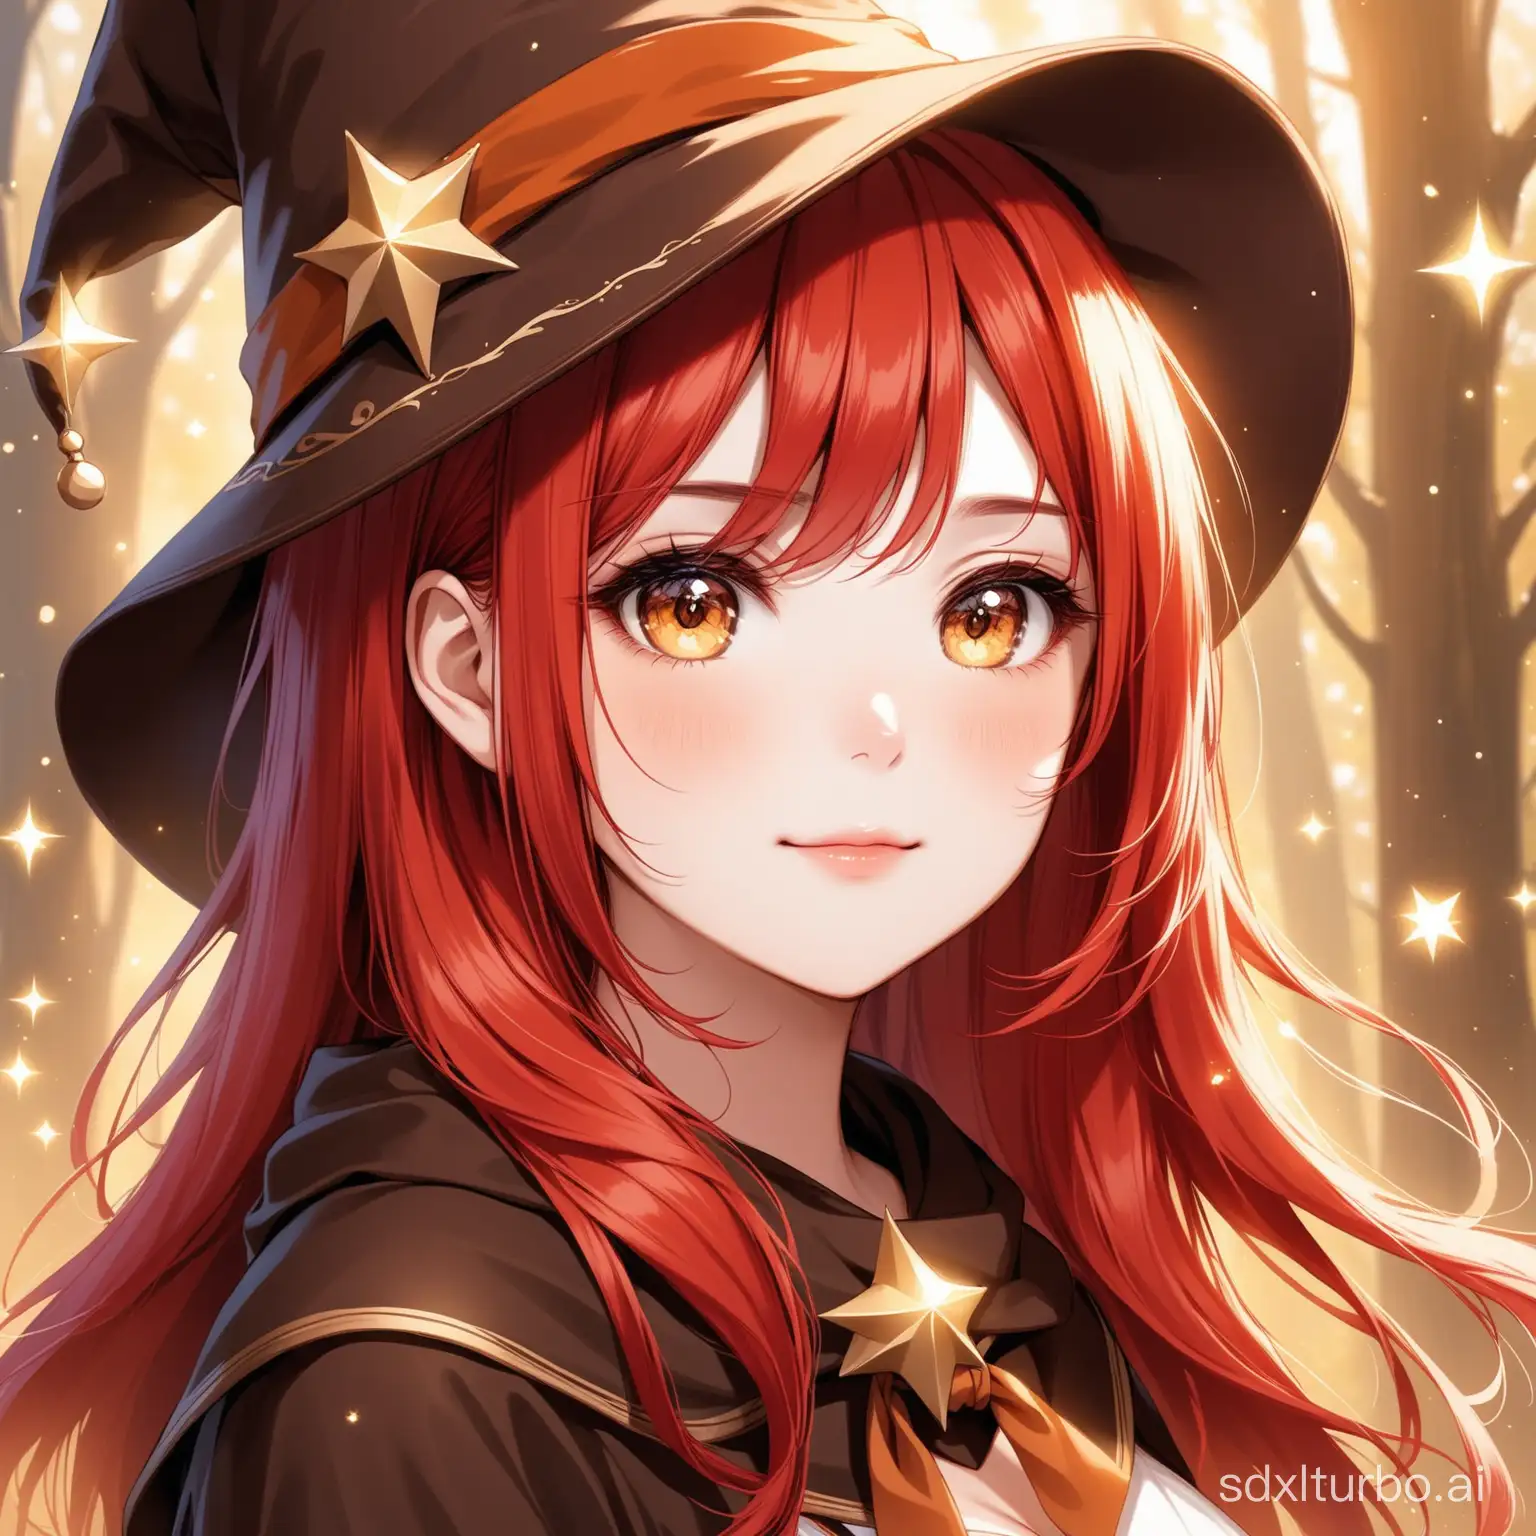 Enchanting-RedHaired-Girl-in-a-Magical-Brown-Hat